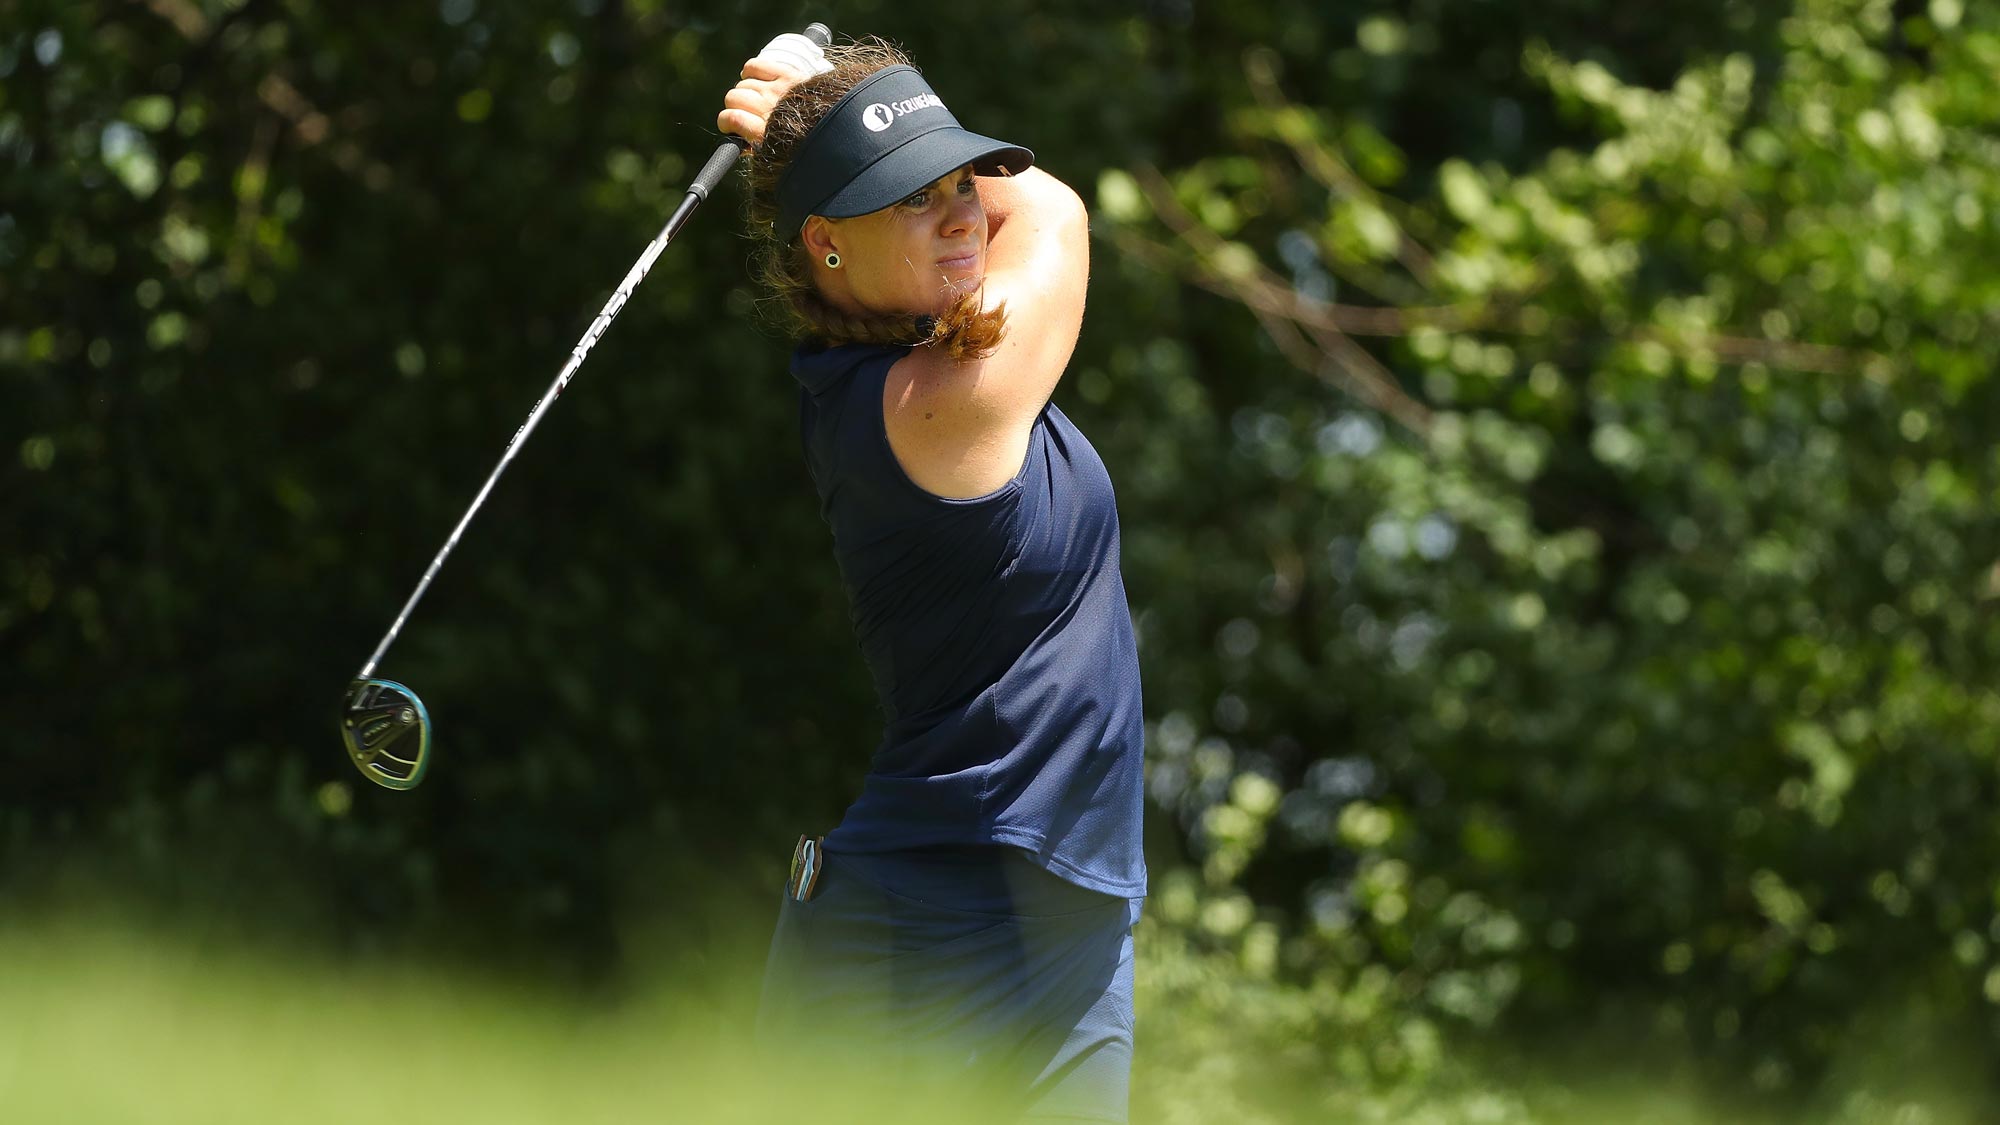 Dani Holmqvist of Sweden watches her drive on the forth hole during the third round of the 2018 KPMG Women's PGA Championship